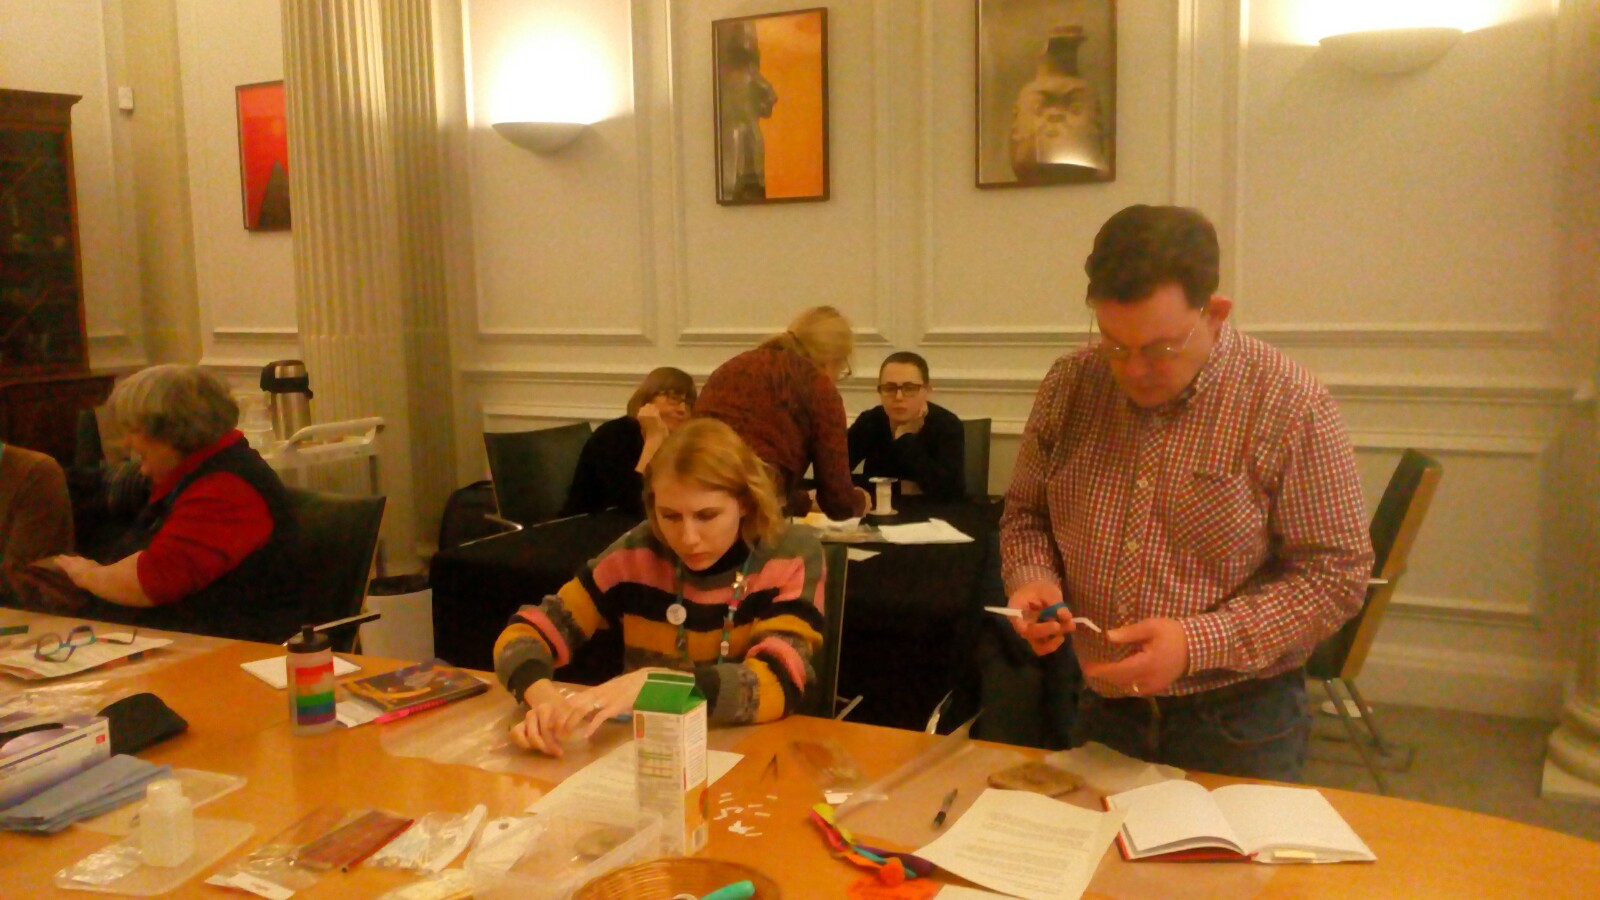 Members of NWFed at a Museums Basics event, sitting and standing around a table labelling objects.